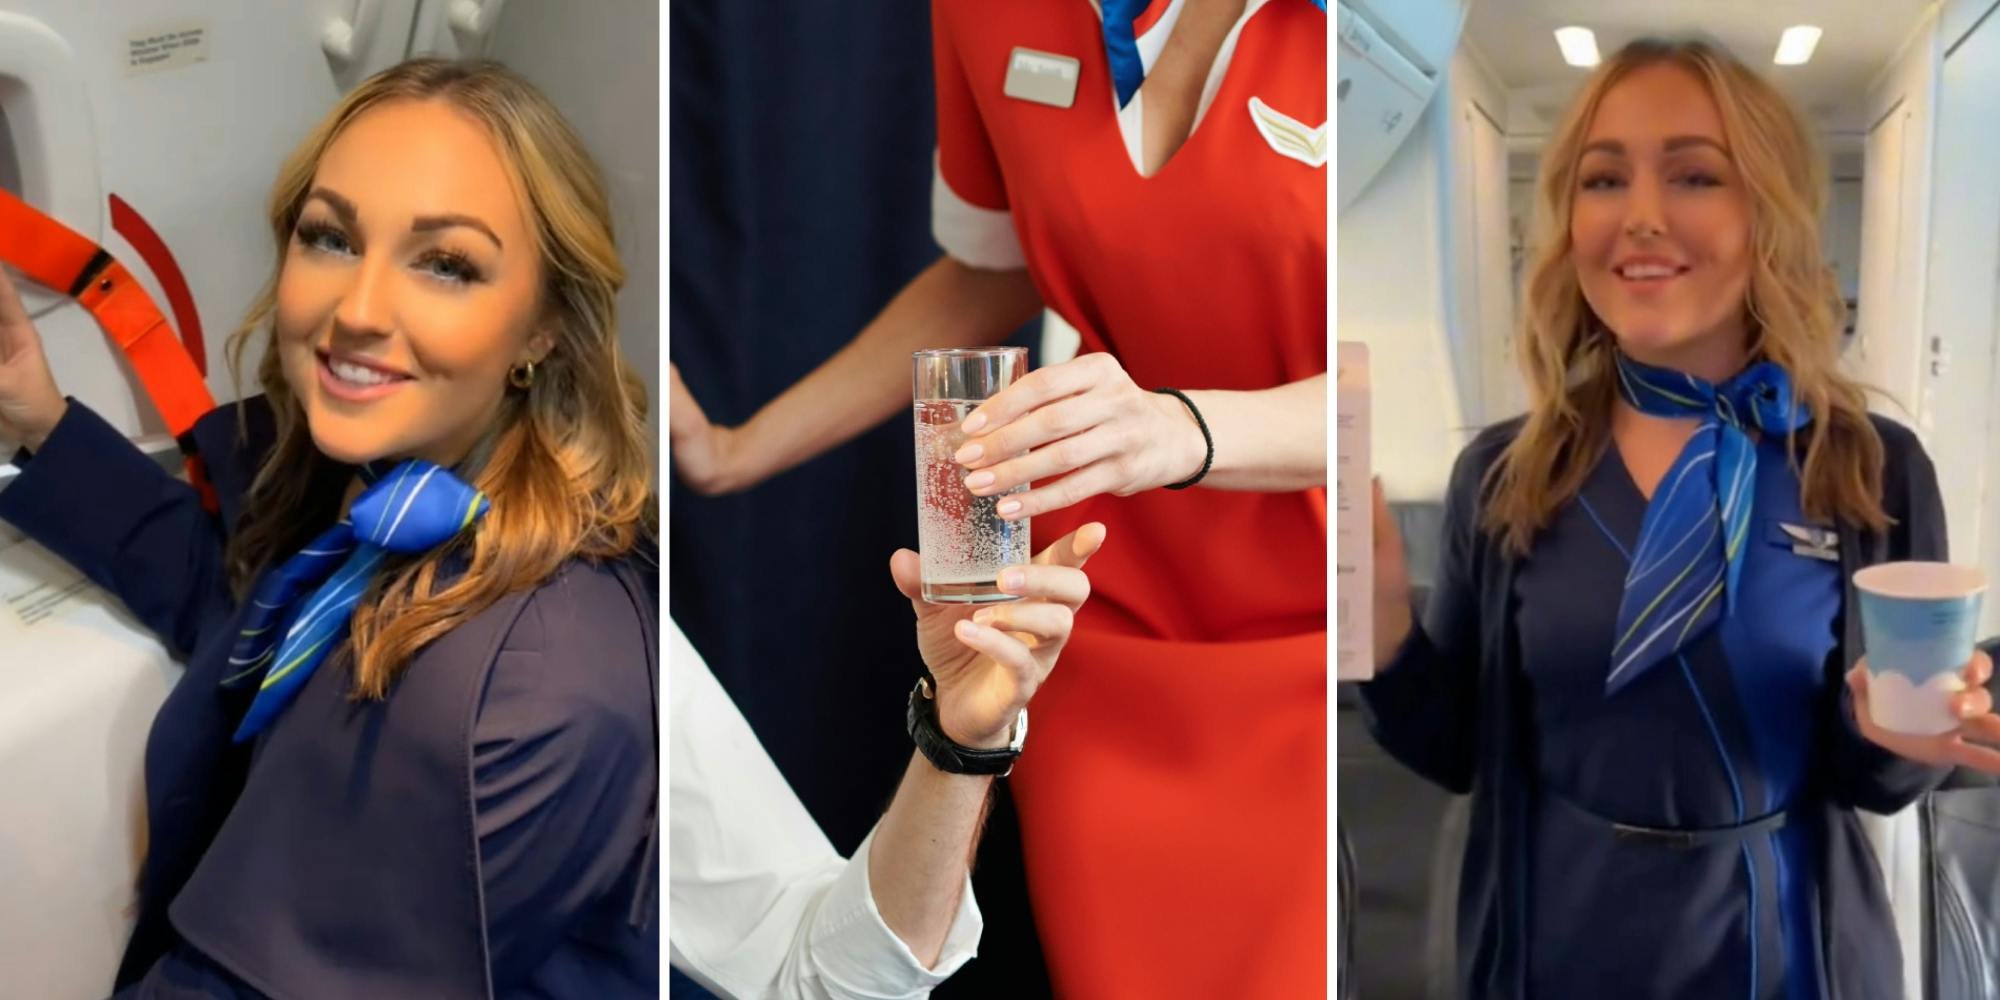 'I need to fly Alaska more': Flight attendants reveal how to get free water during boarding